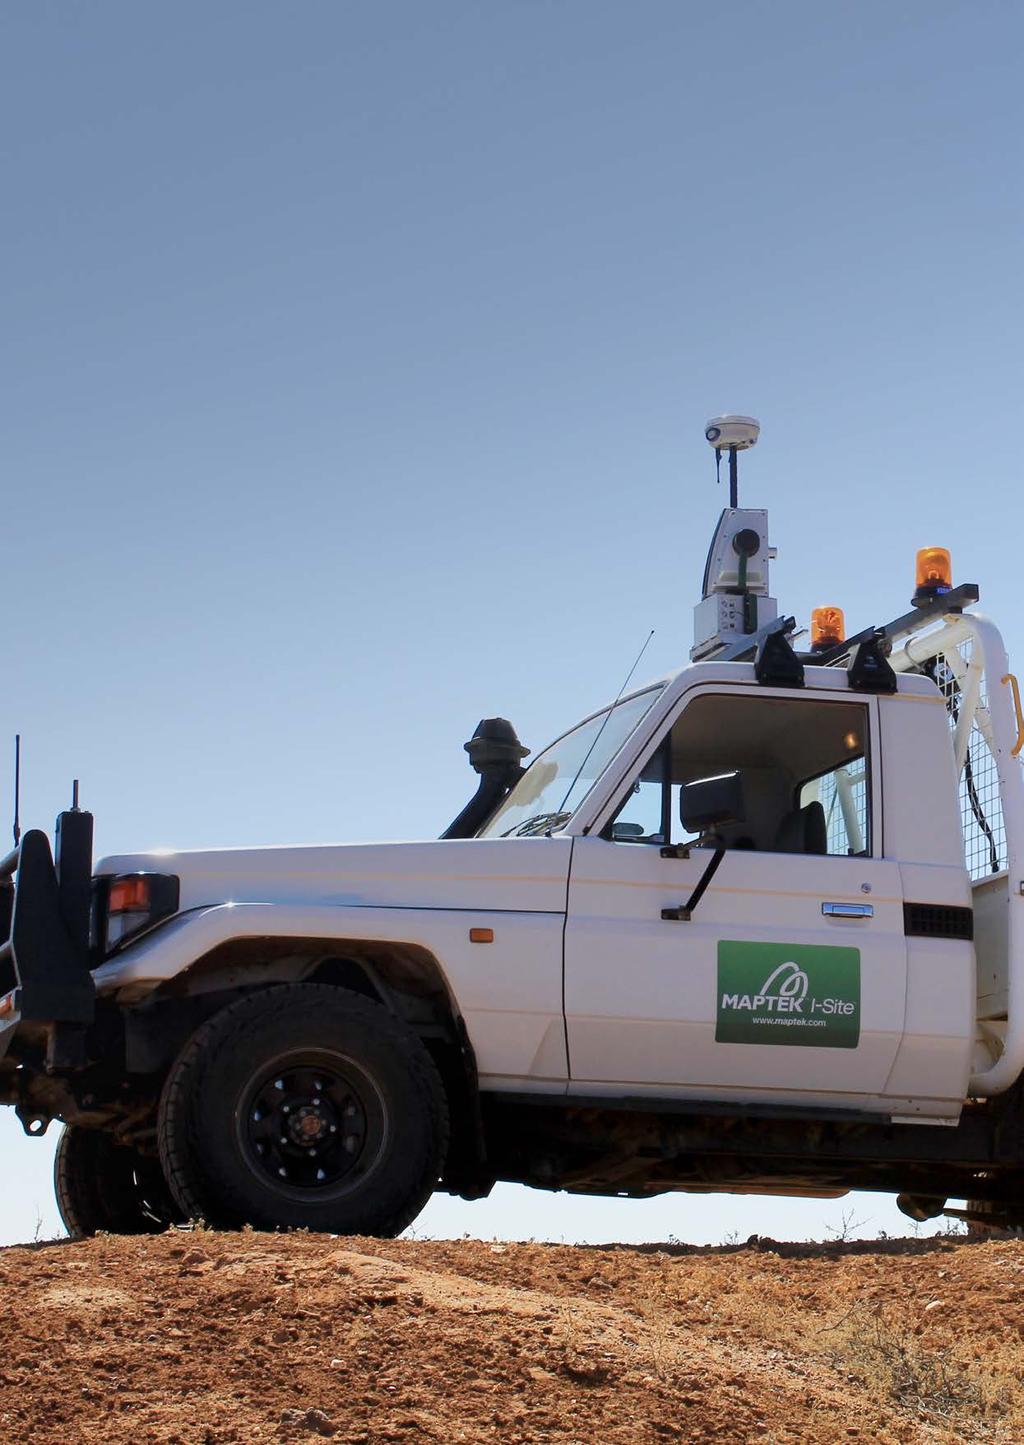 The I-Site vehicle system allows I-Site laser scanners to be mounted and transported on common site vehicles.